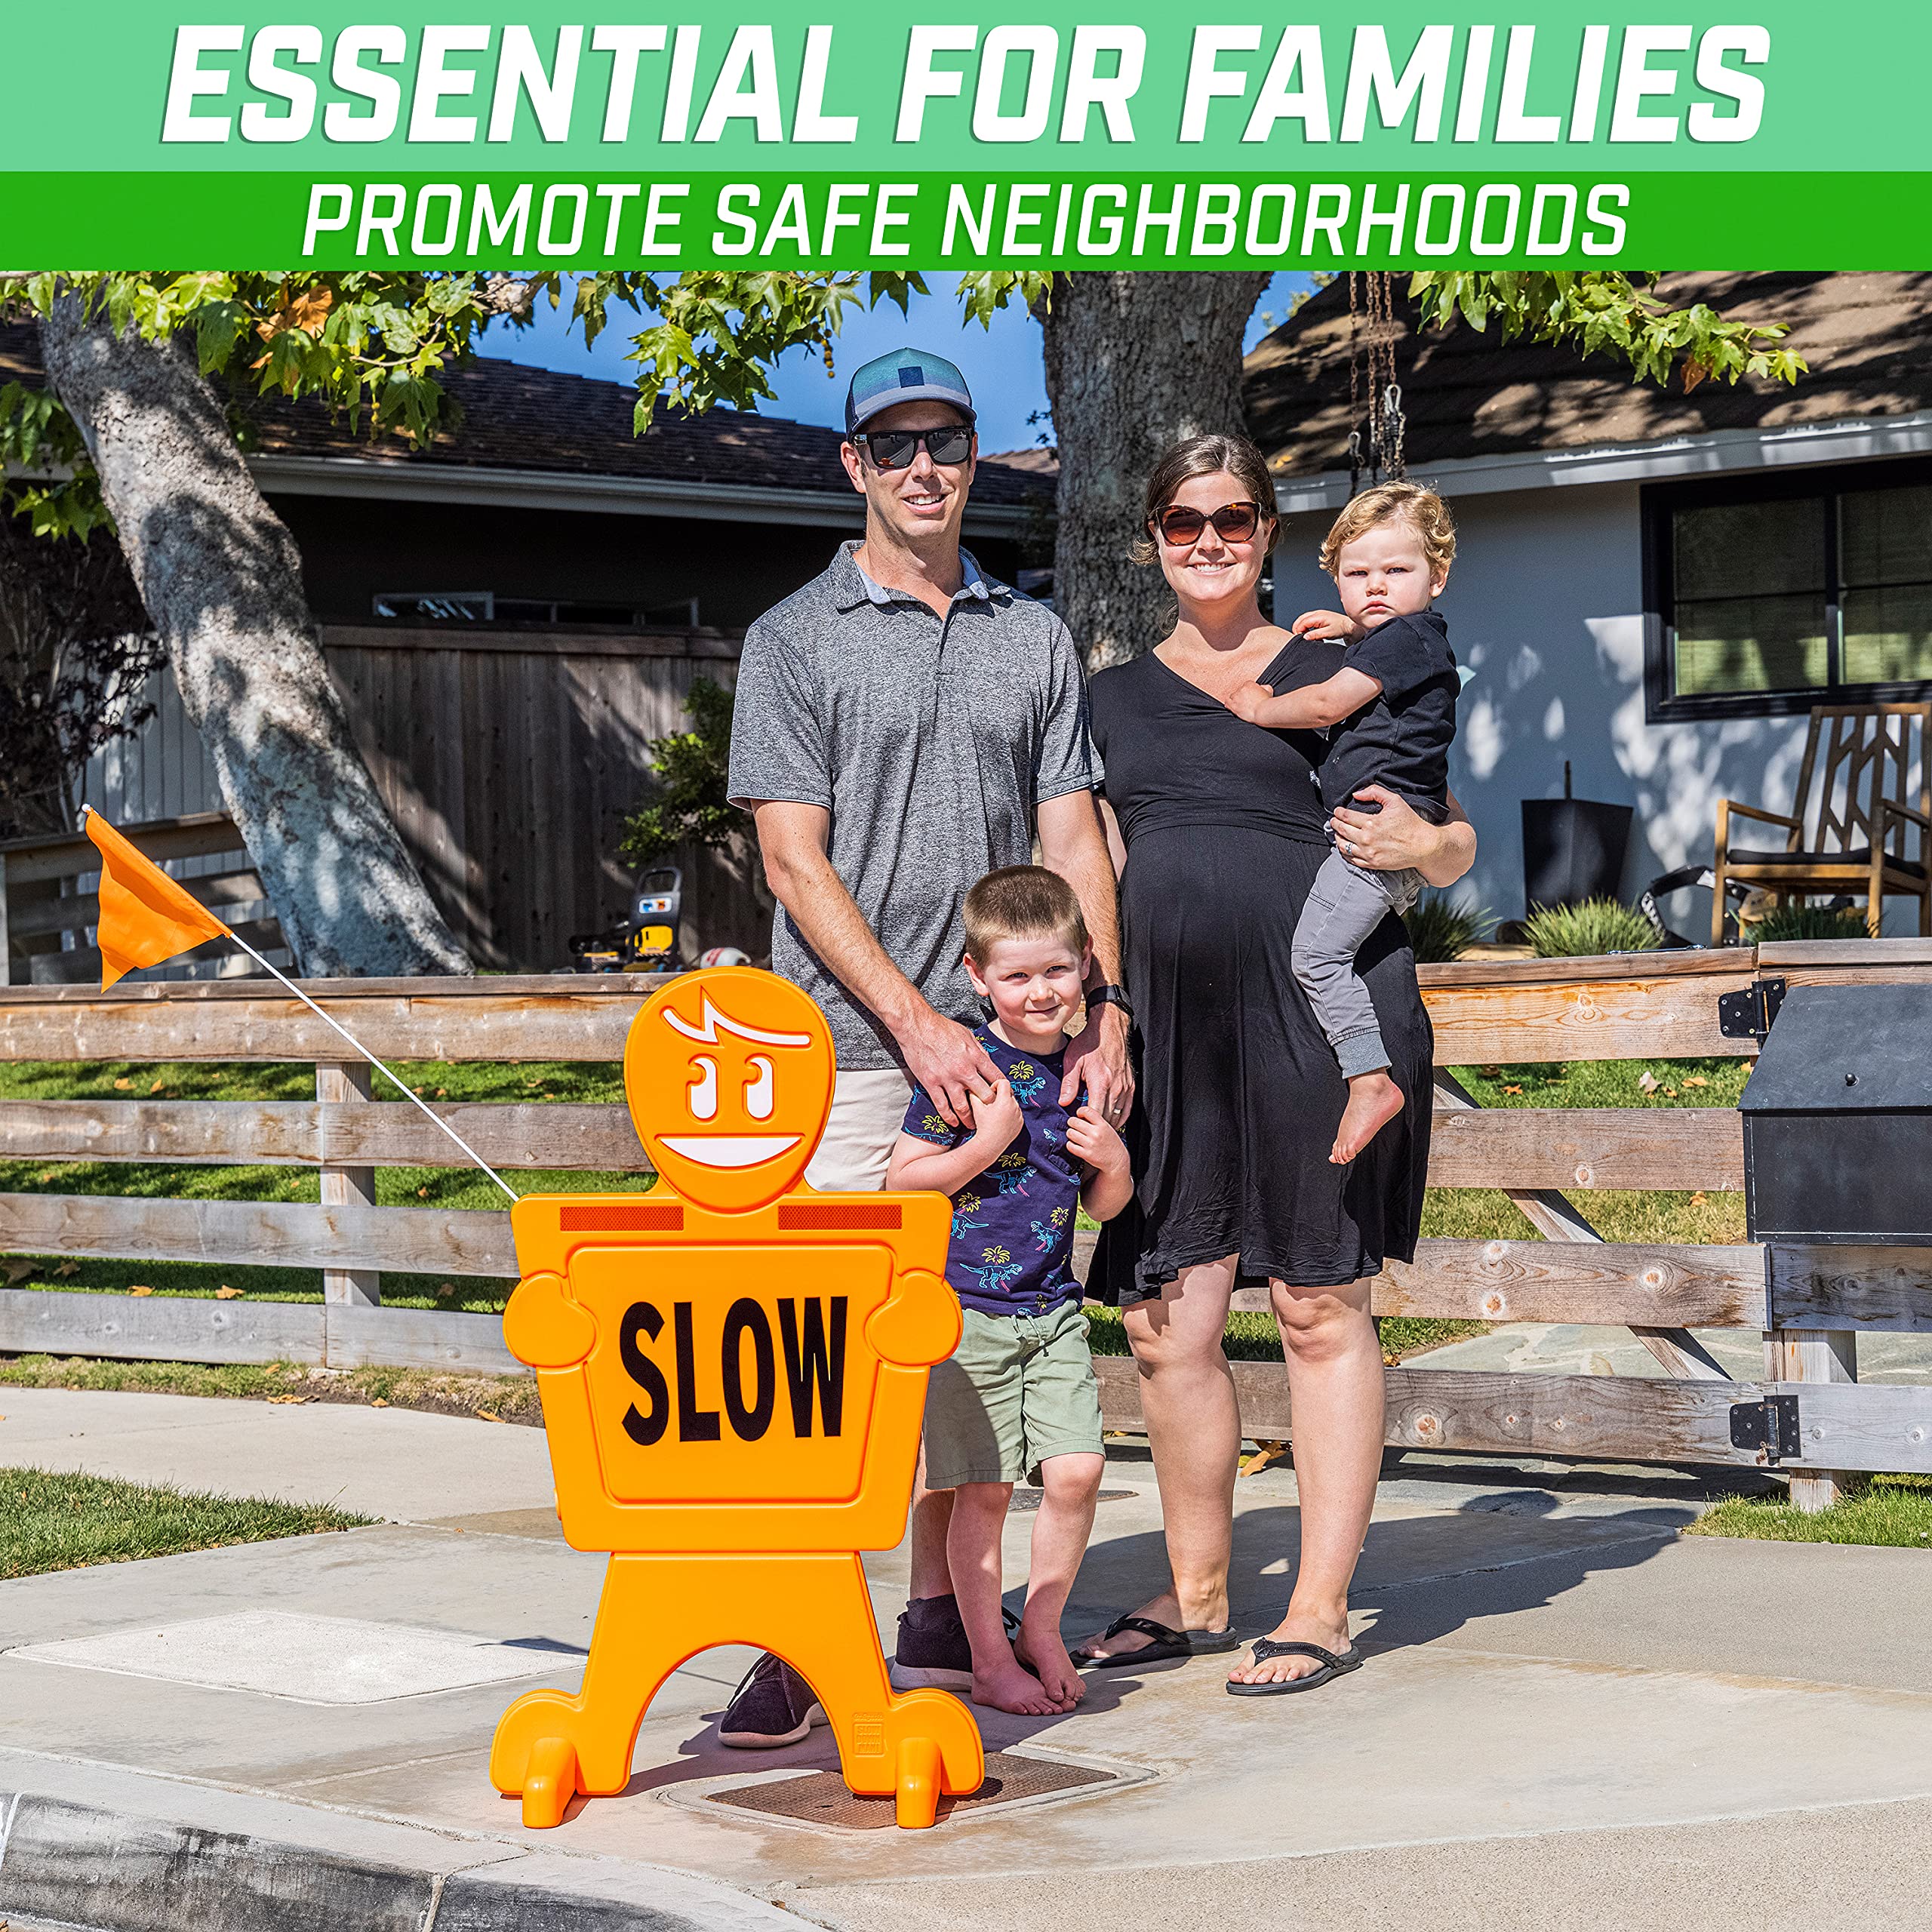 GoSports Slow Down Man! Street Safety Sign - 3 ft High Visibility Kids at Play Signage for Neighborhoods with 9 Decal Options and Flag